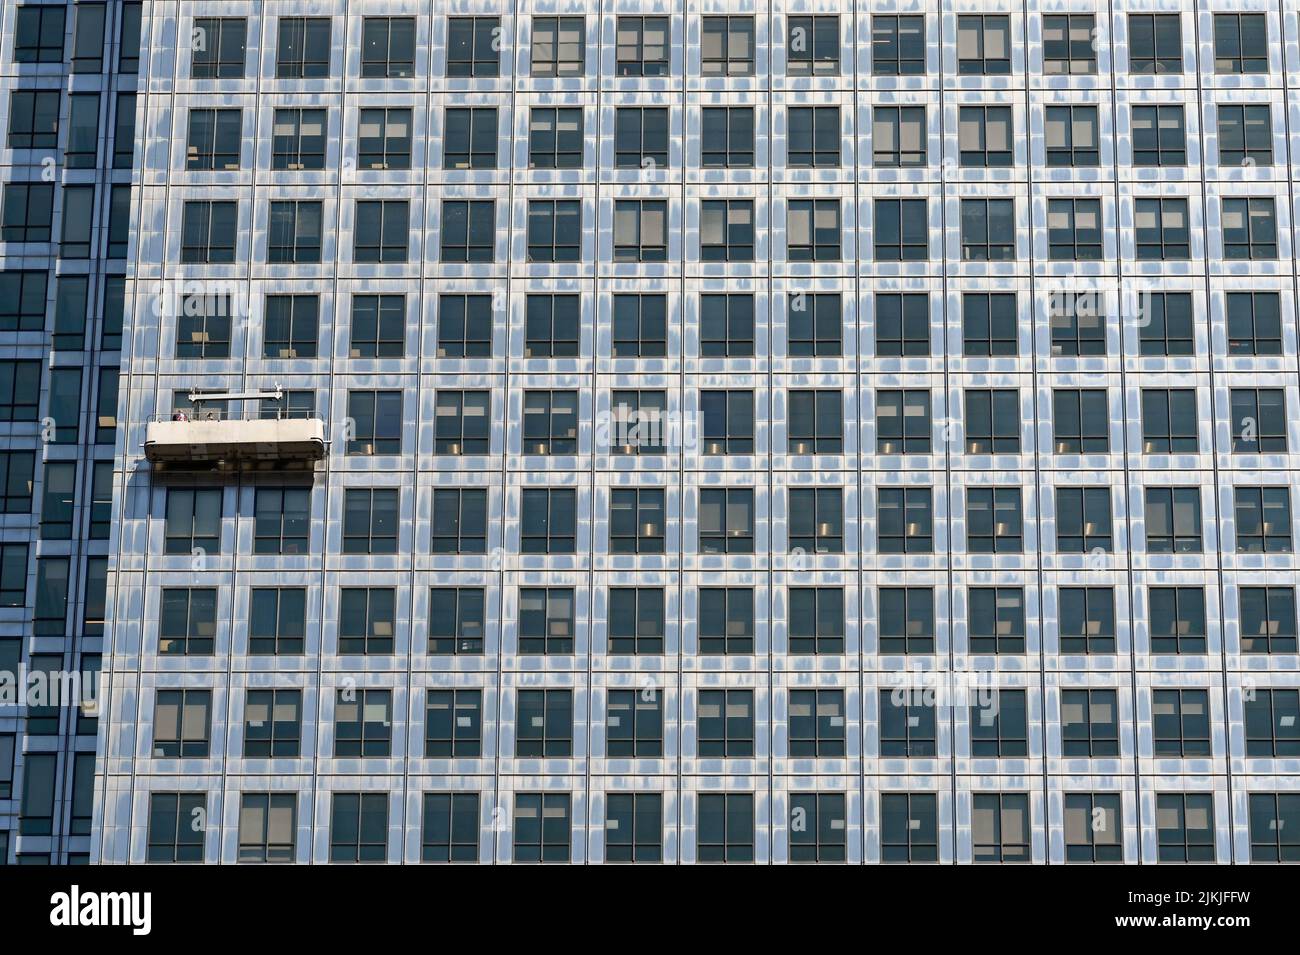 London, England - June 2022: Window cleaning cradle on the outside of an office tower block in anary Wharf Stock Photo